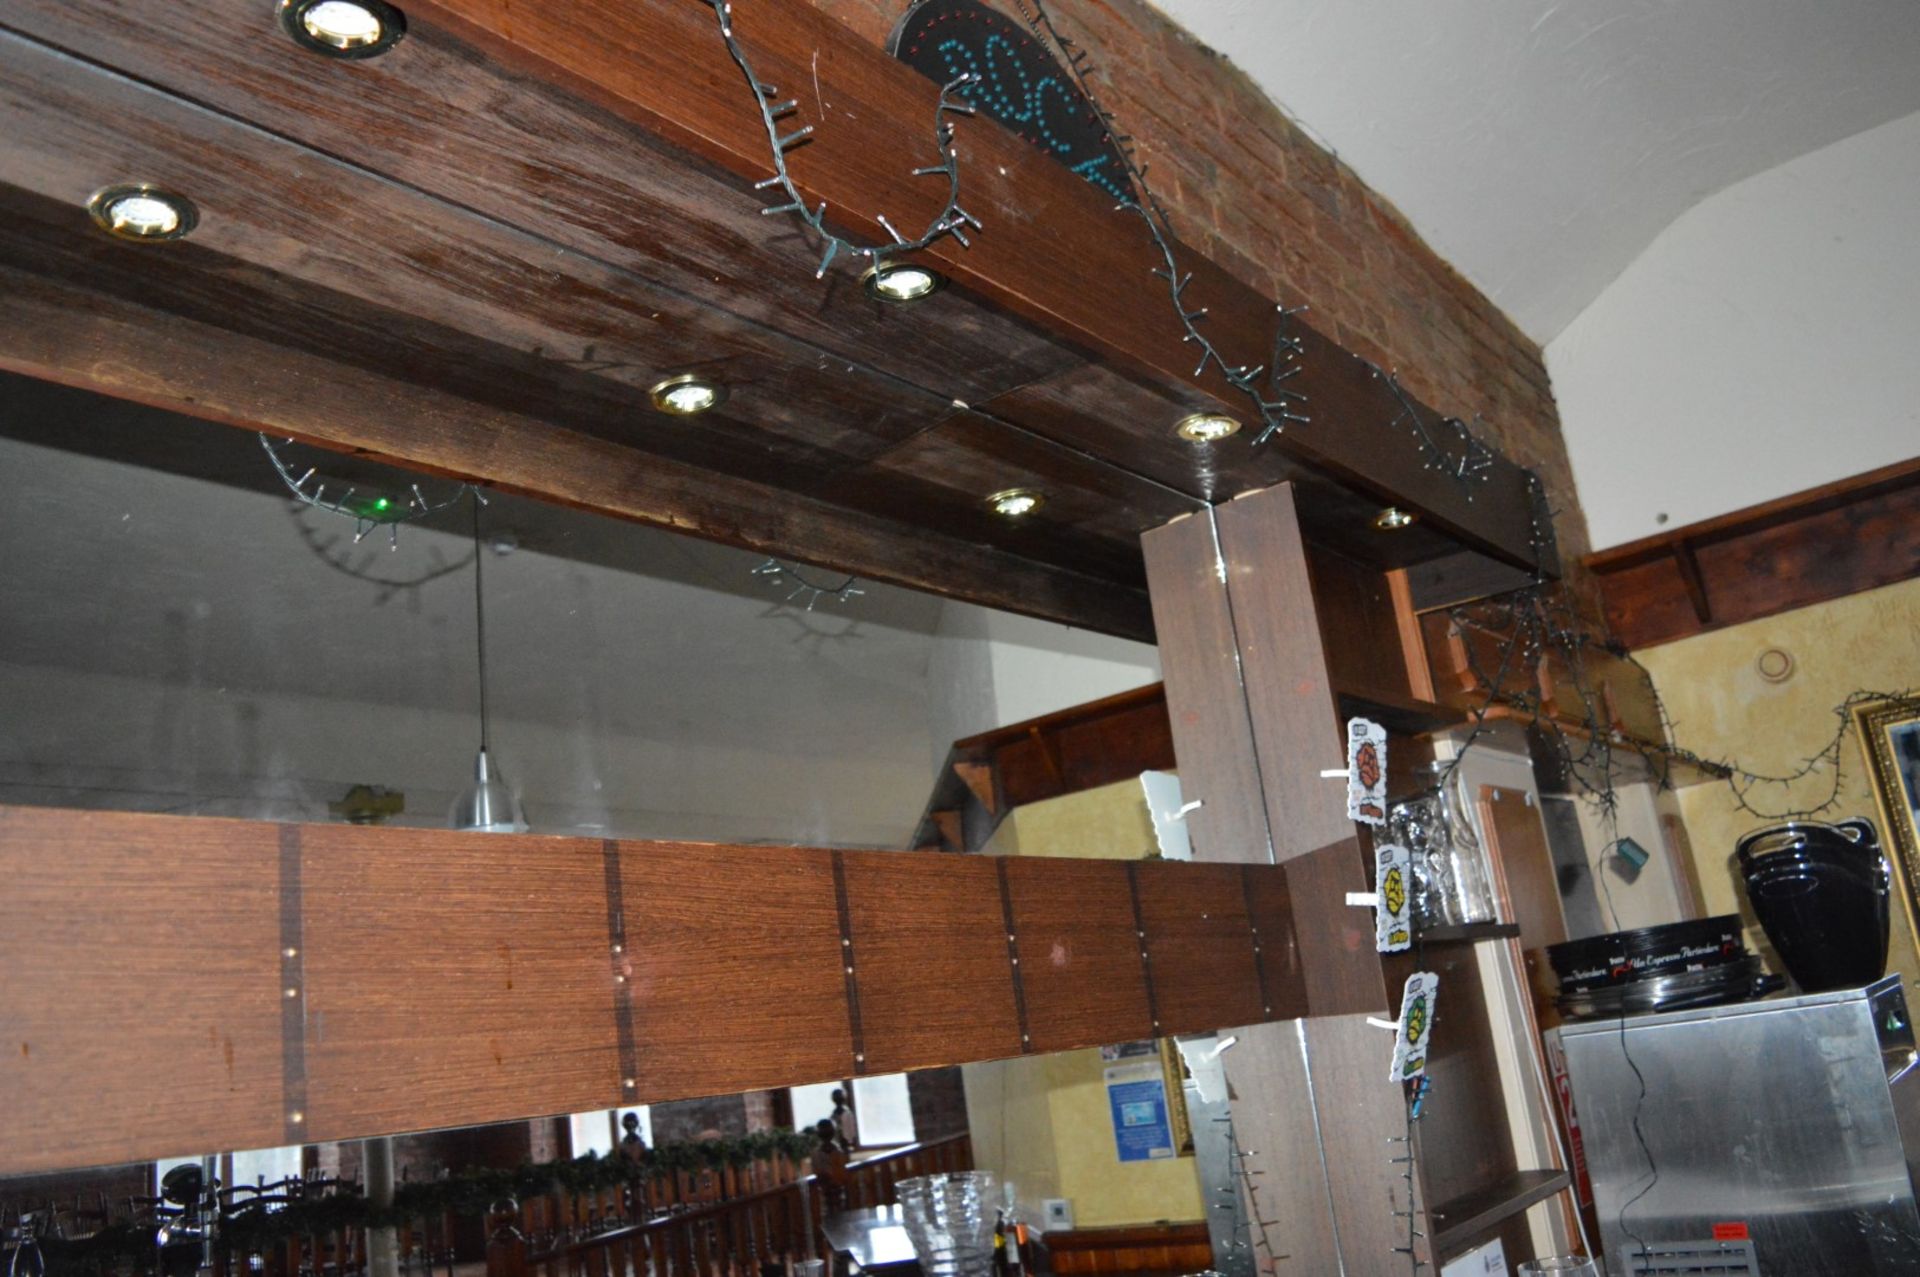 1 x Pub / Restaurant Bar With Walnut Coloured Tops, Mirrored Backbar Unit and Four Suspended Light - Image 5 of 11